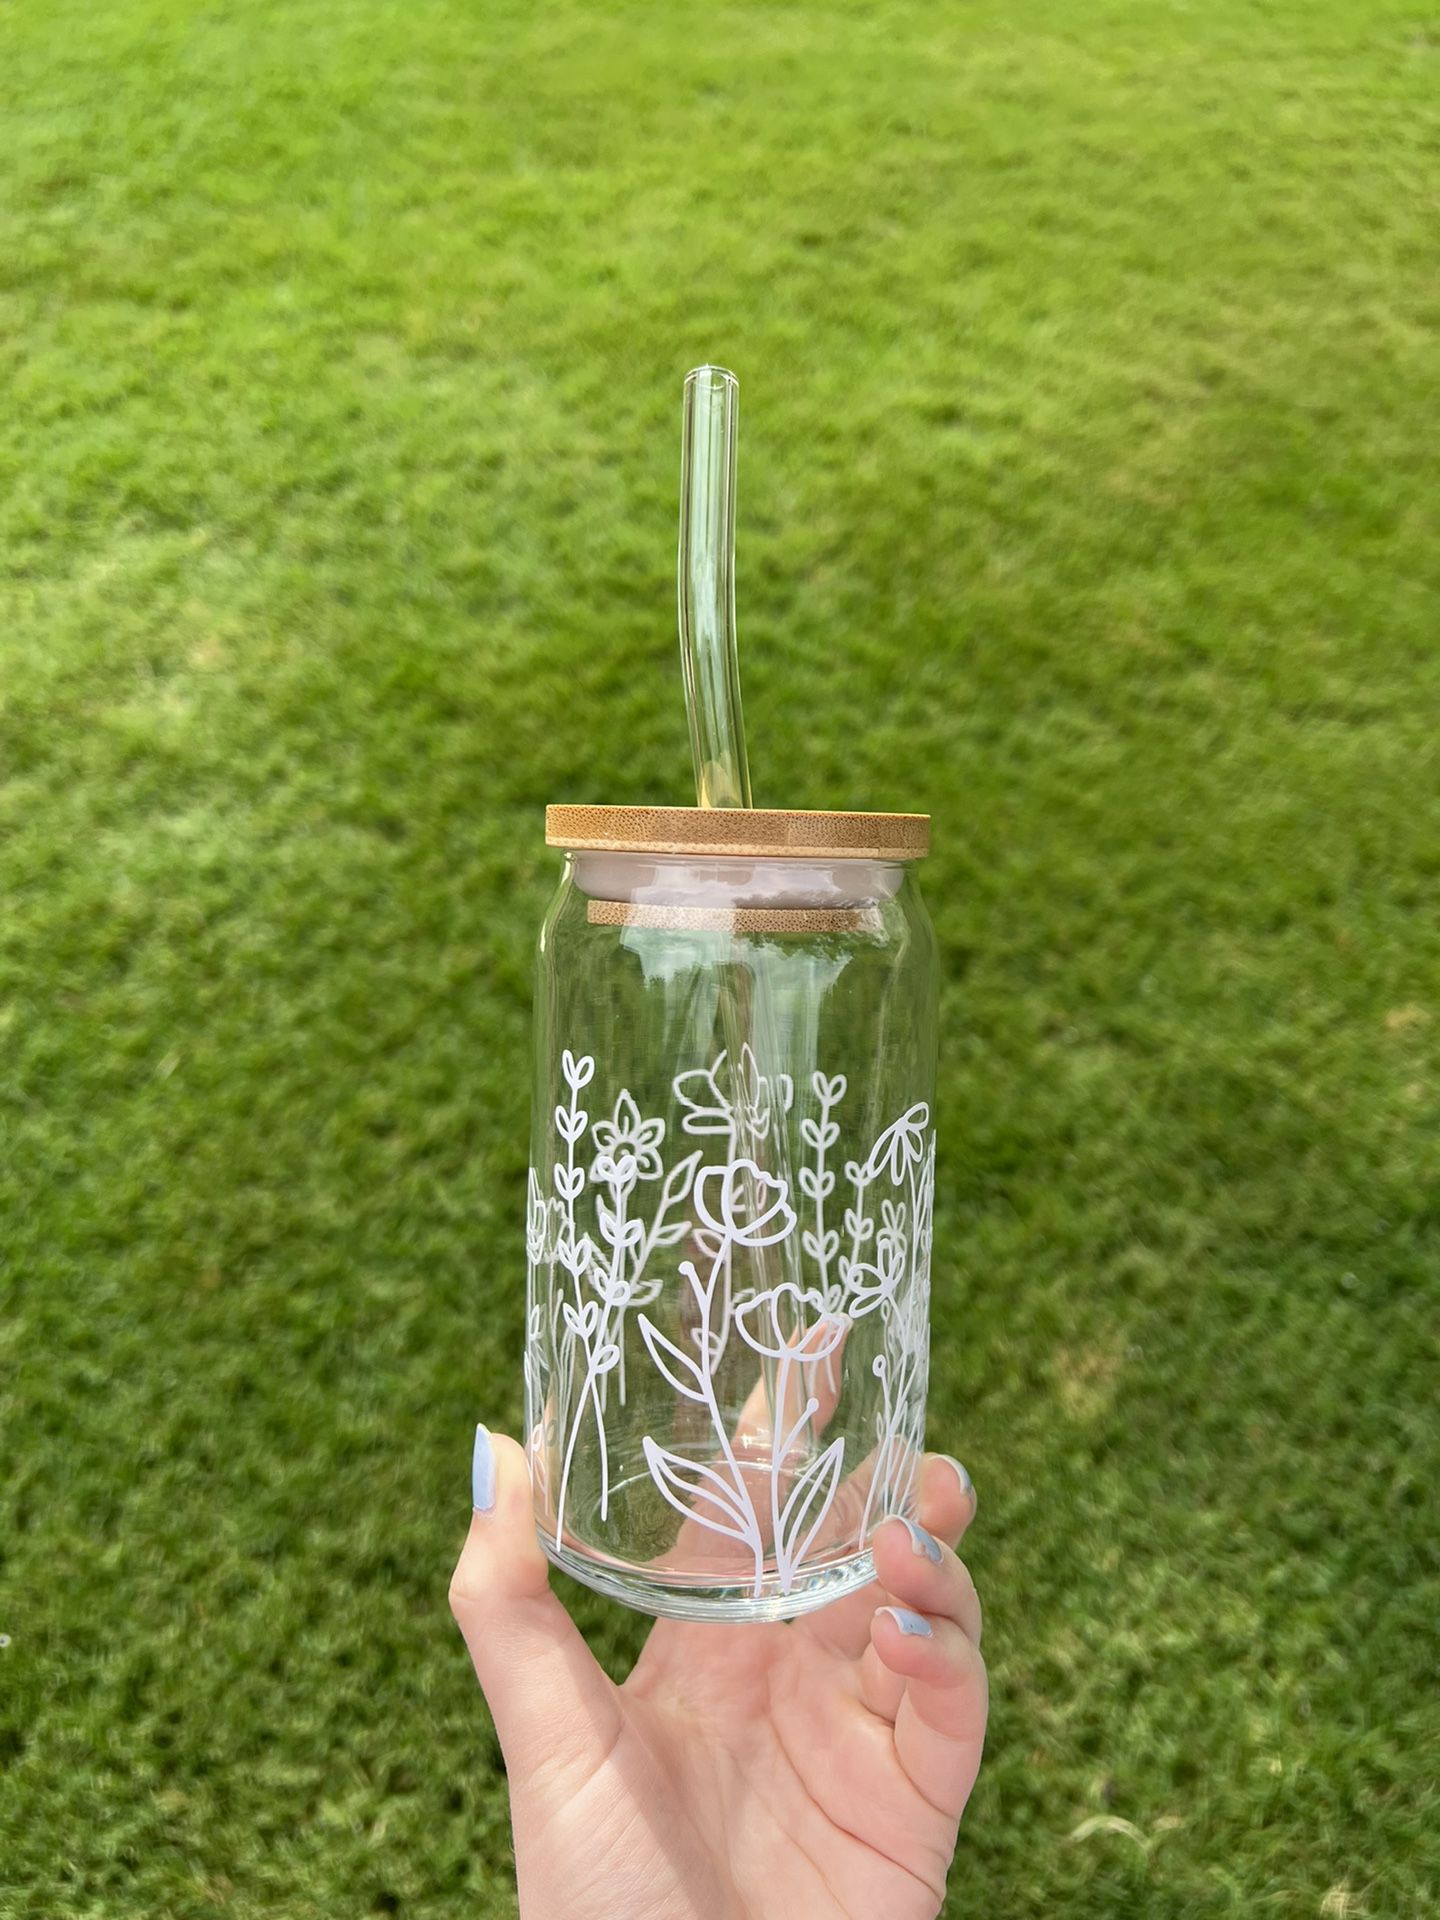 Flower design beer glass can with glass straw and bamboo lid